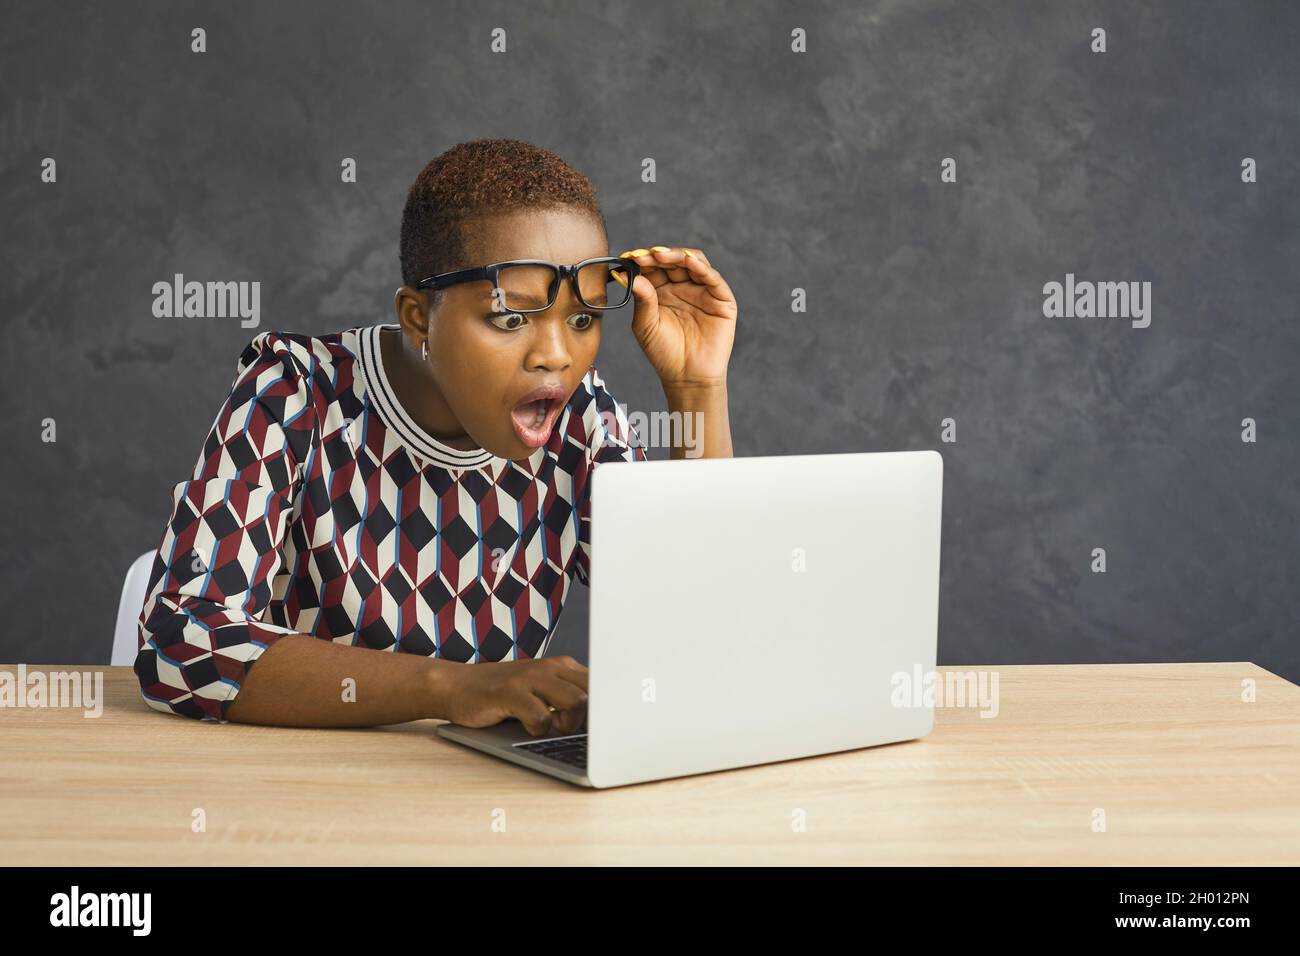 Shocked young African American woman looking open-mouthed at screen of her laptop Stock Photo